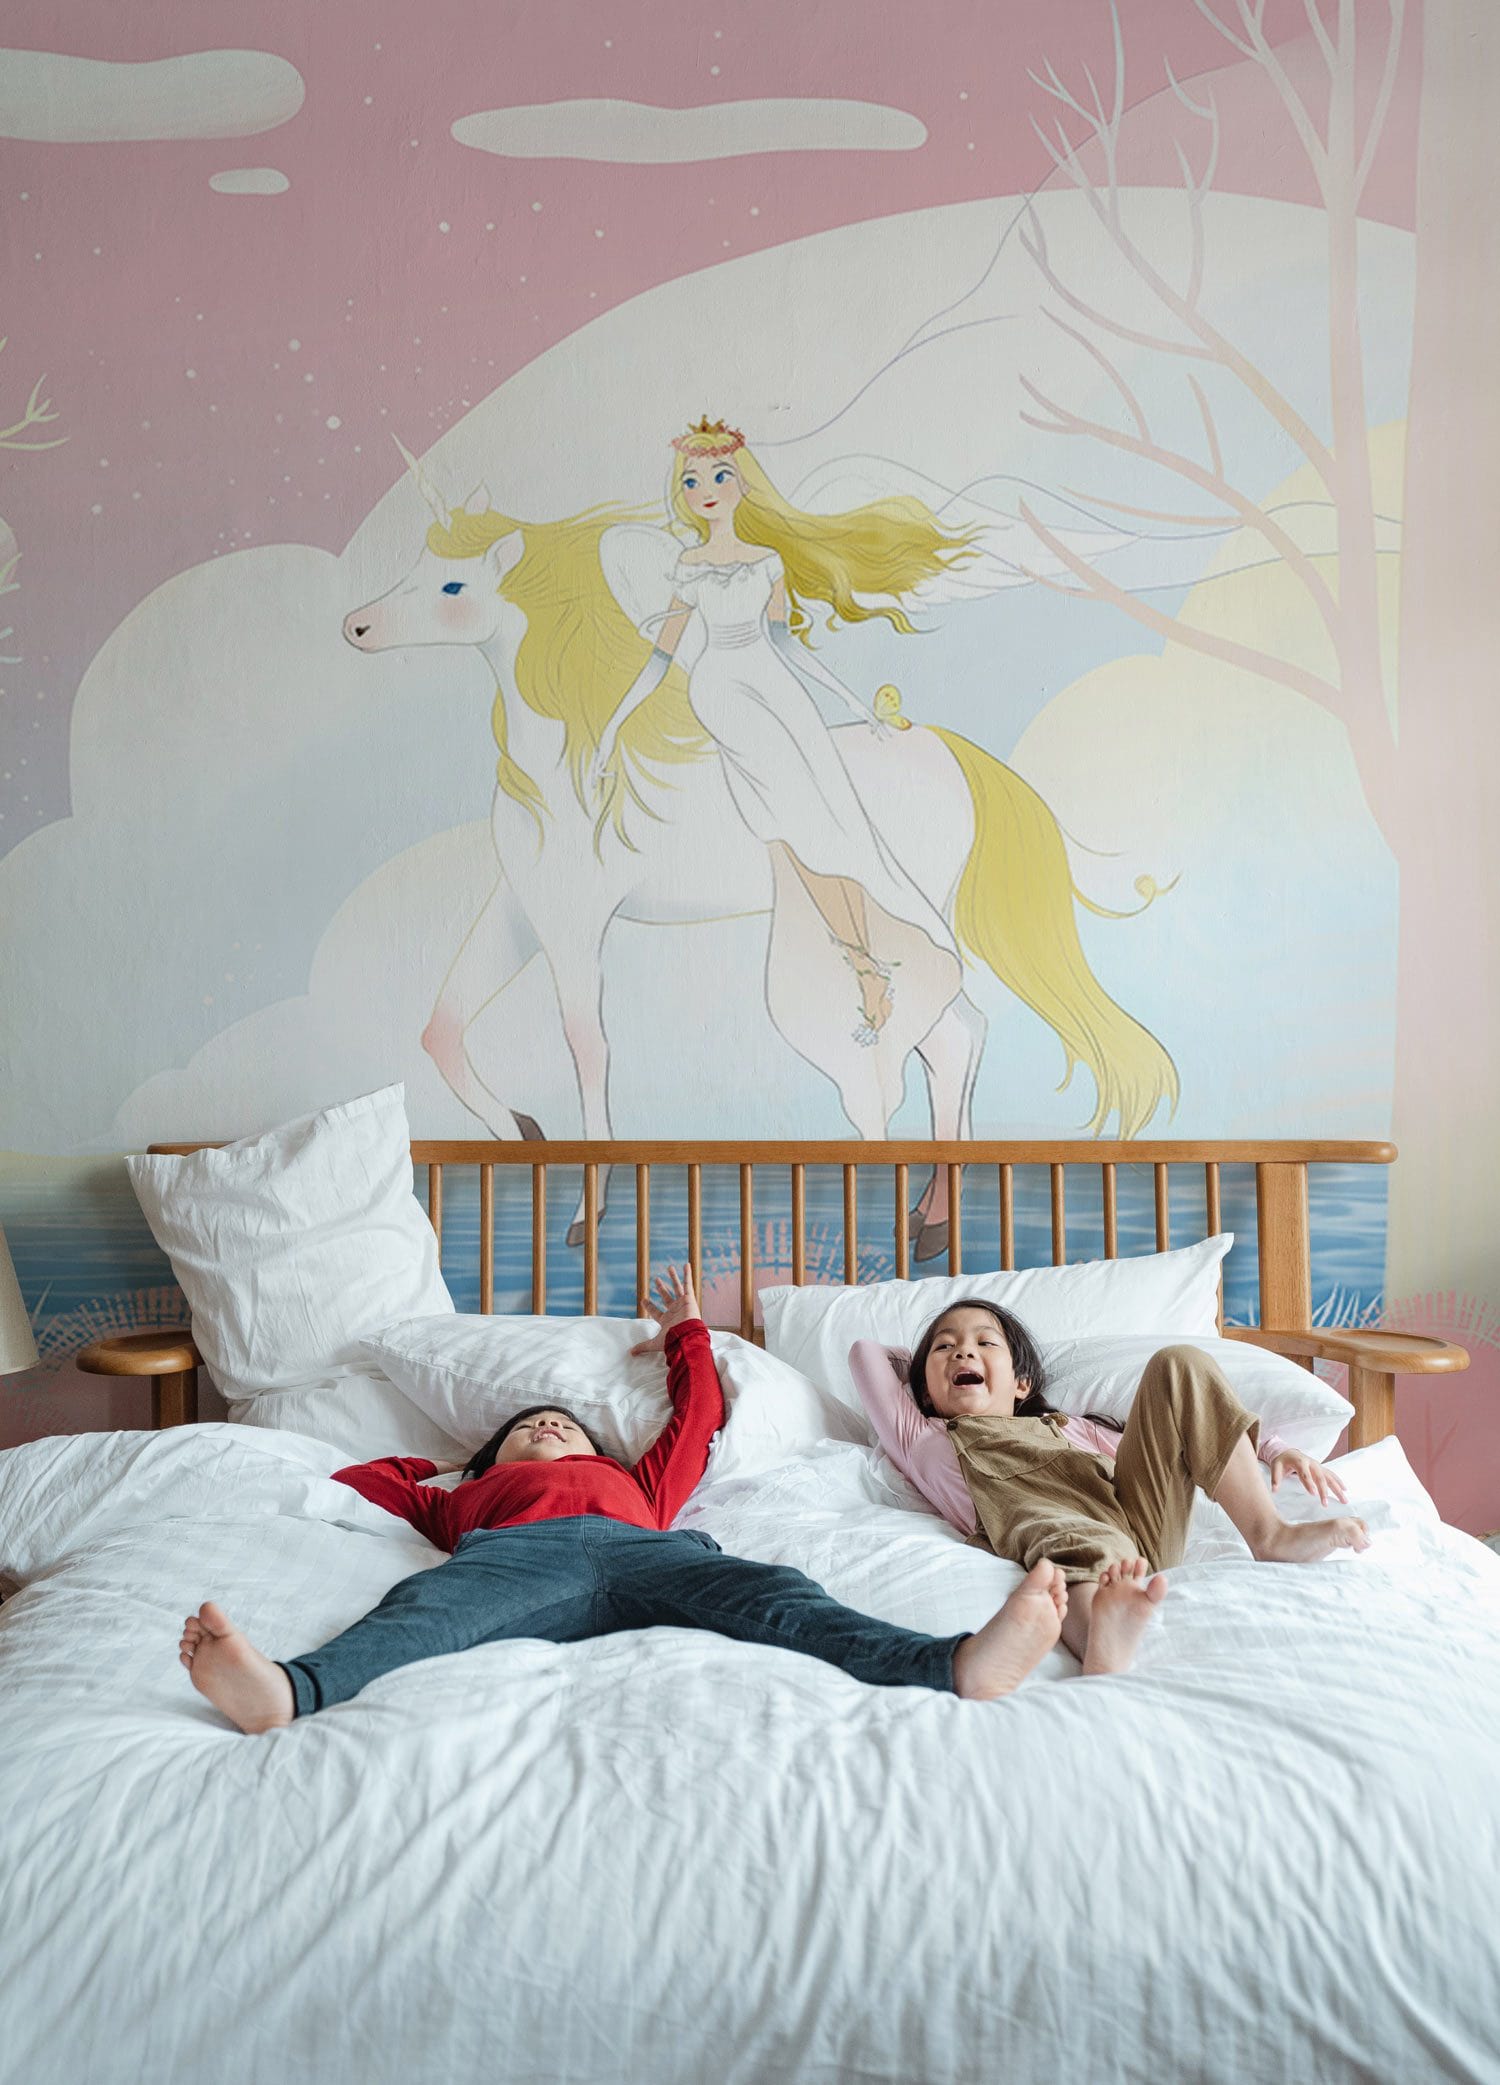 Unicorn Animal Cartoon Wall Mural for Decorating Children's Bedrooms and Playrooms